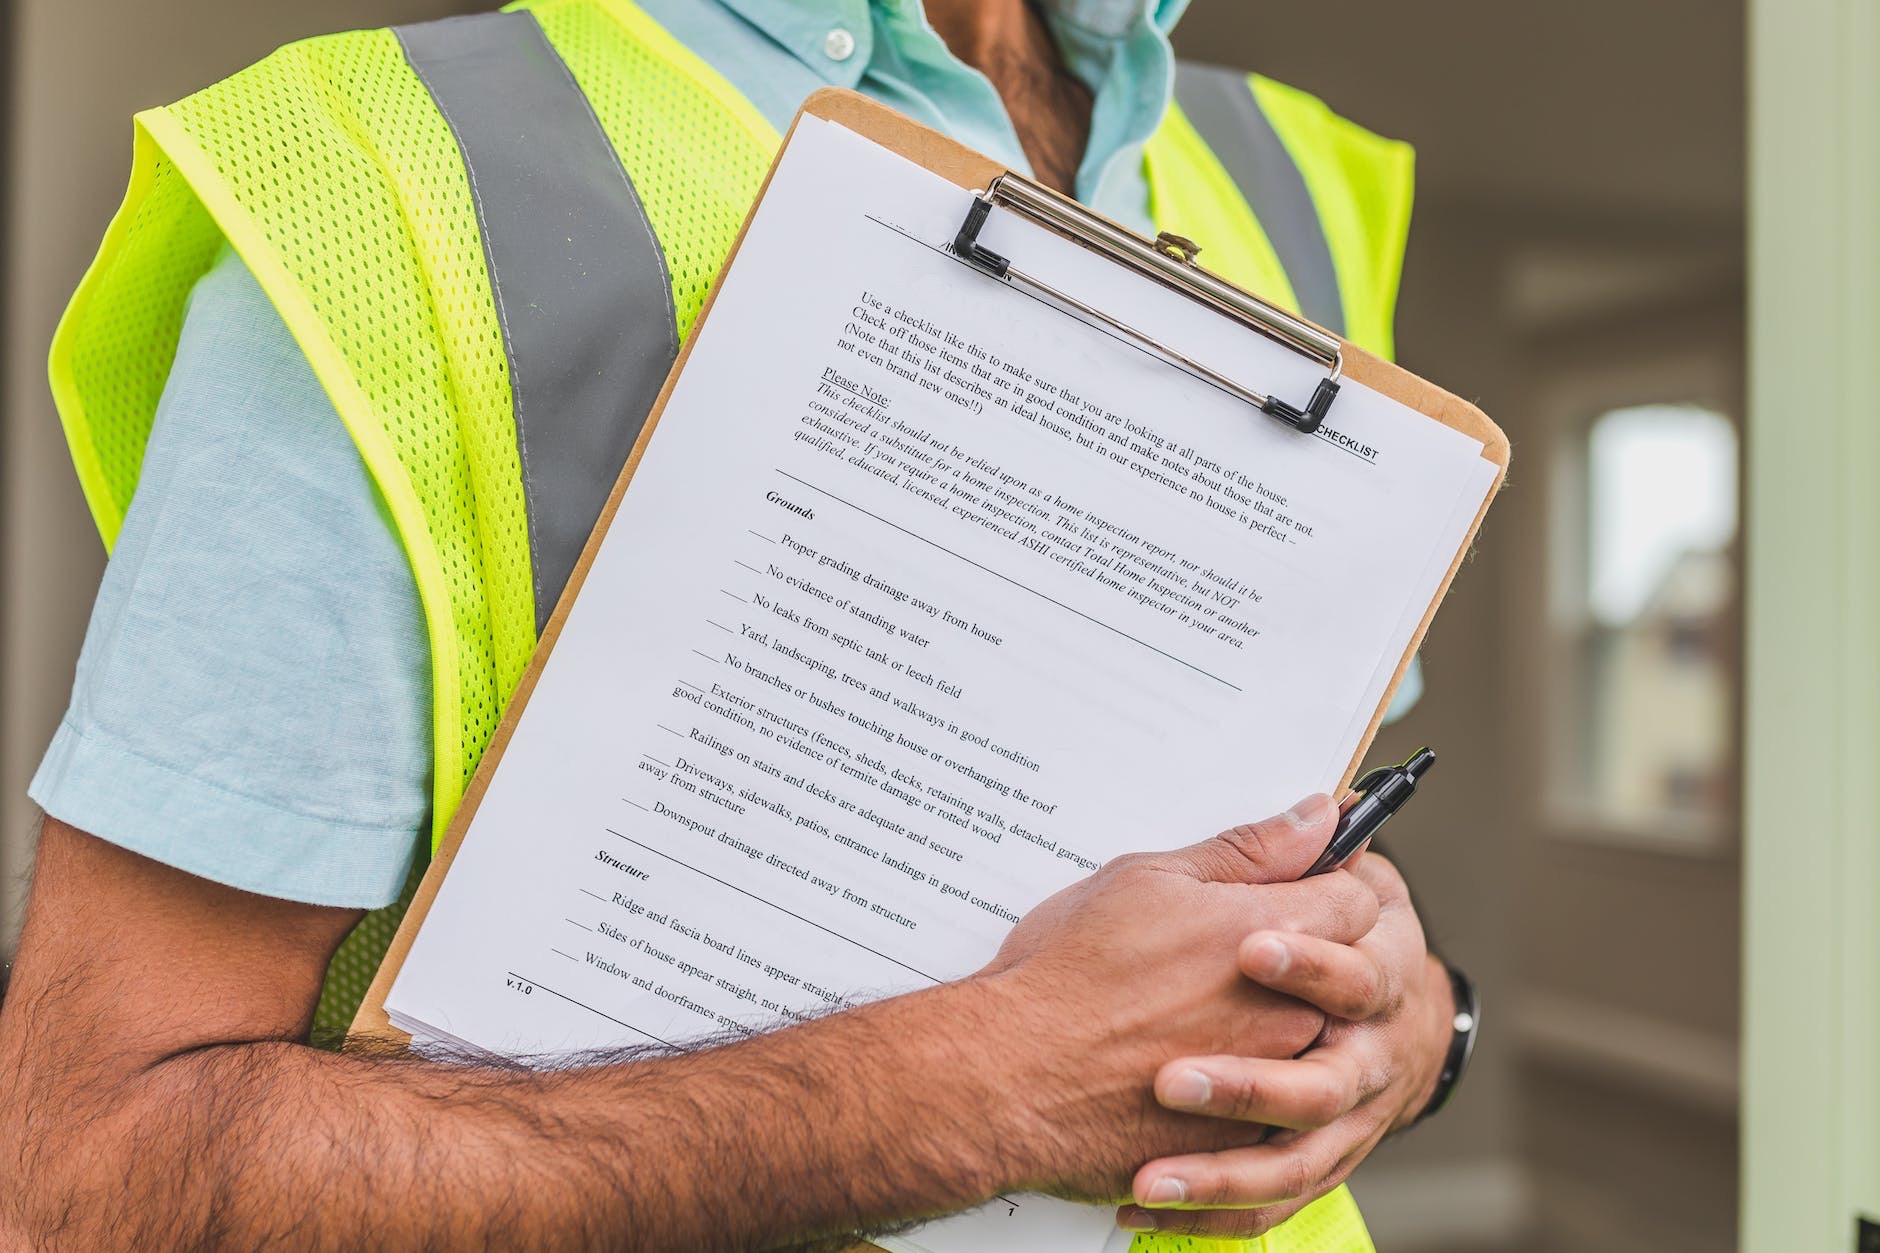 person in yellow reflective safety vest holding a pen and checklist